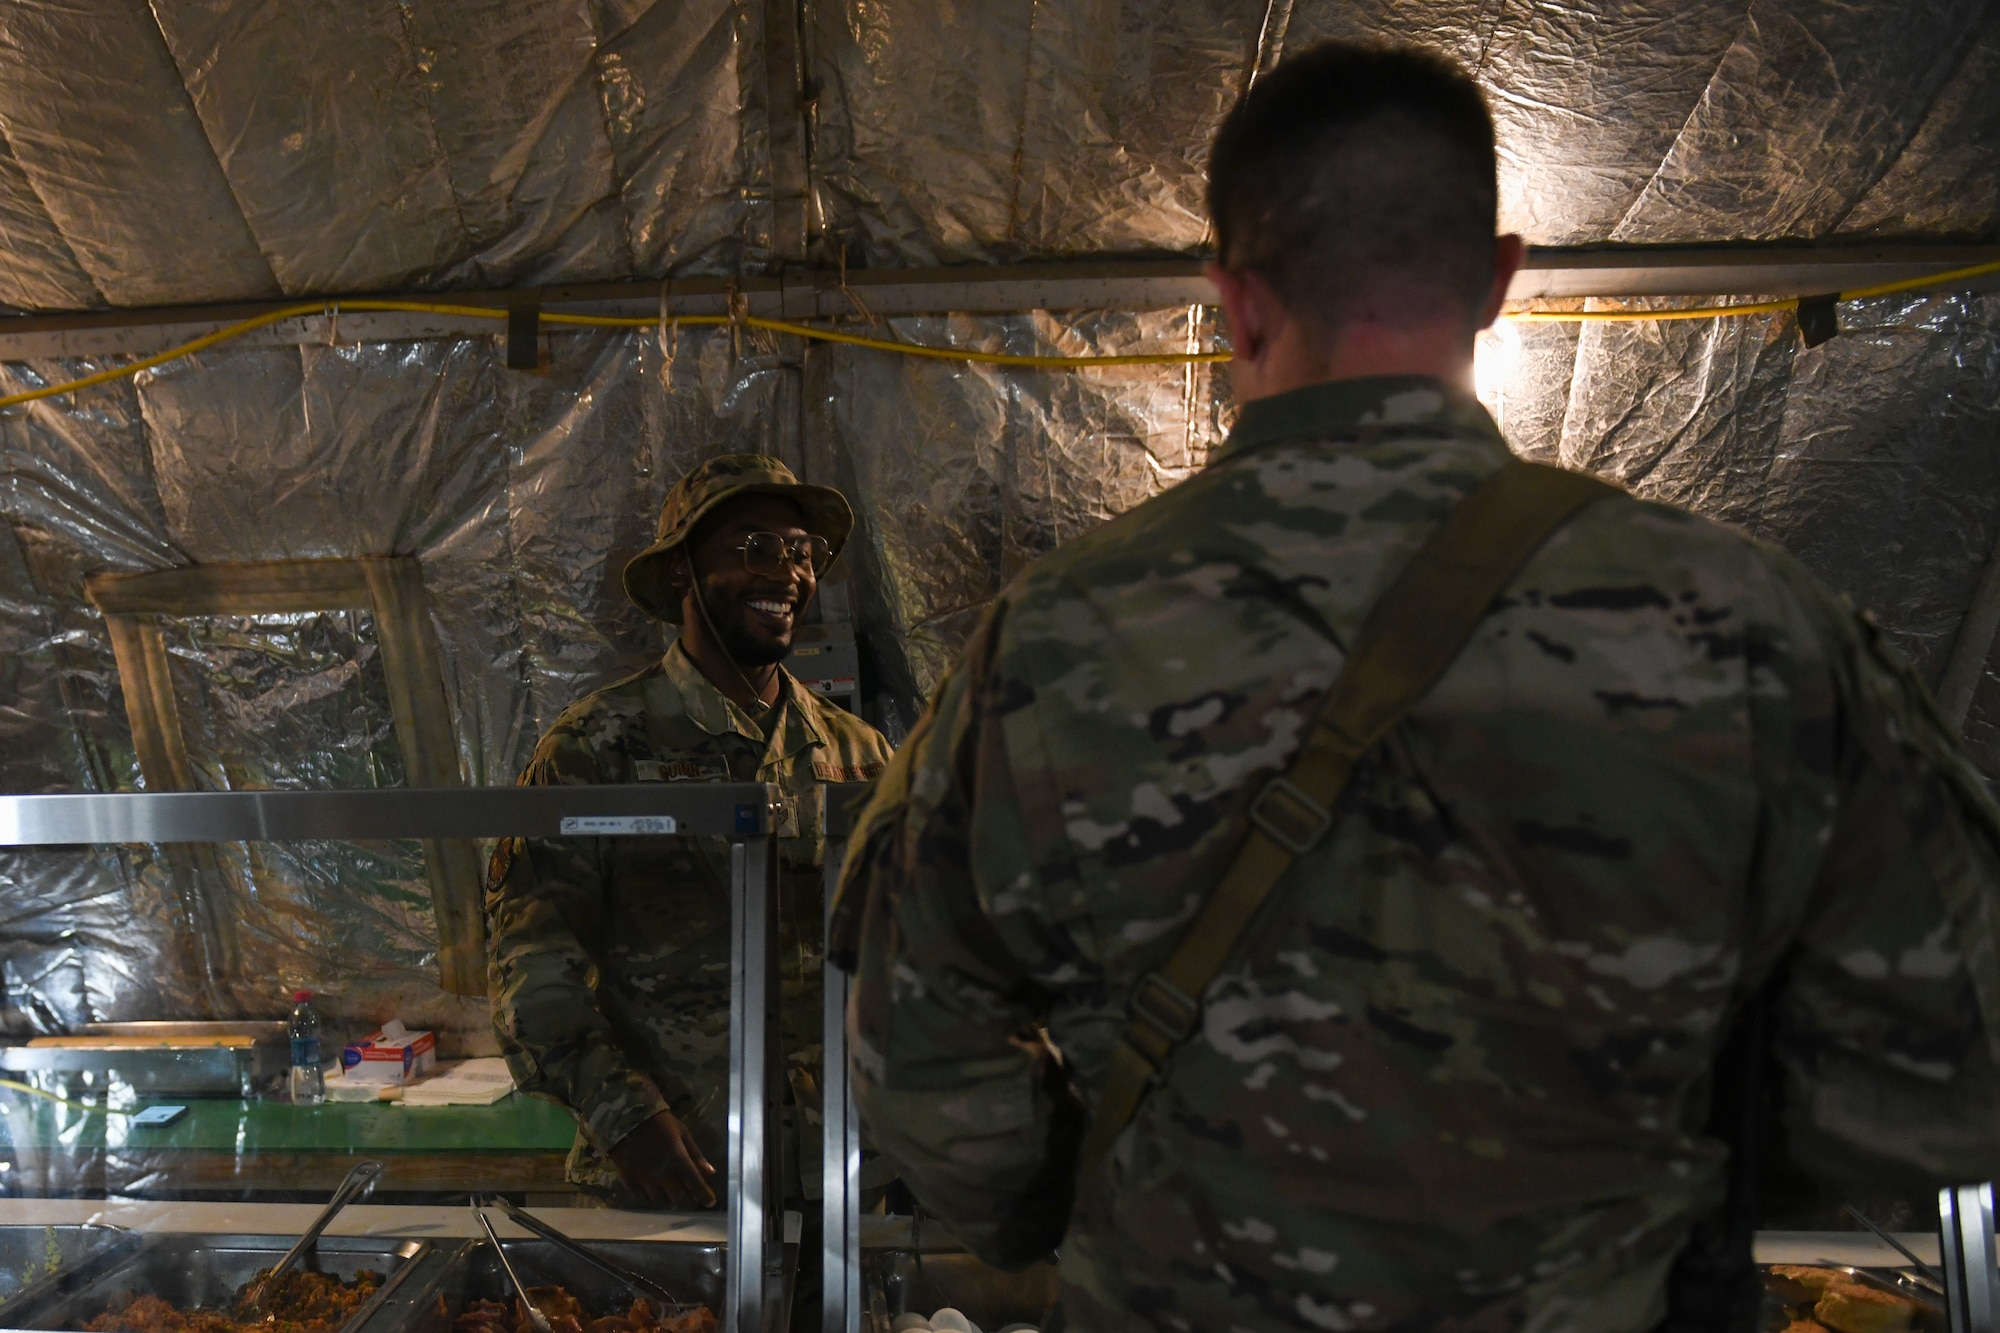 U.S. Air Force Staff Sgt. Anthony Guinn, 776th Expeditionary Air Base Squadron food services supervisor, smiles while he serves food at Chabelley Airfield, Djibouti, Dec. 8, 2021. Guinn strives to make people laugh and smile as he works because he believes everything he does starts with the people. (U.S. Air Force photo by Senior Airman Ericka A. Woolever)